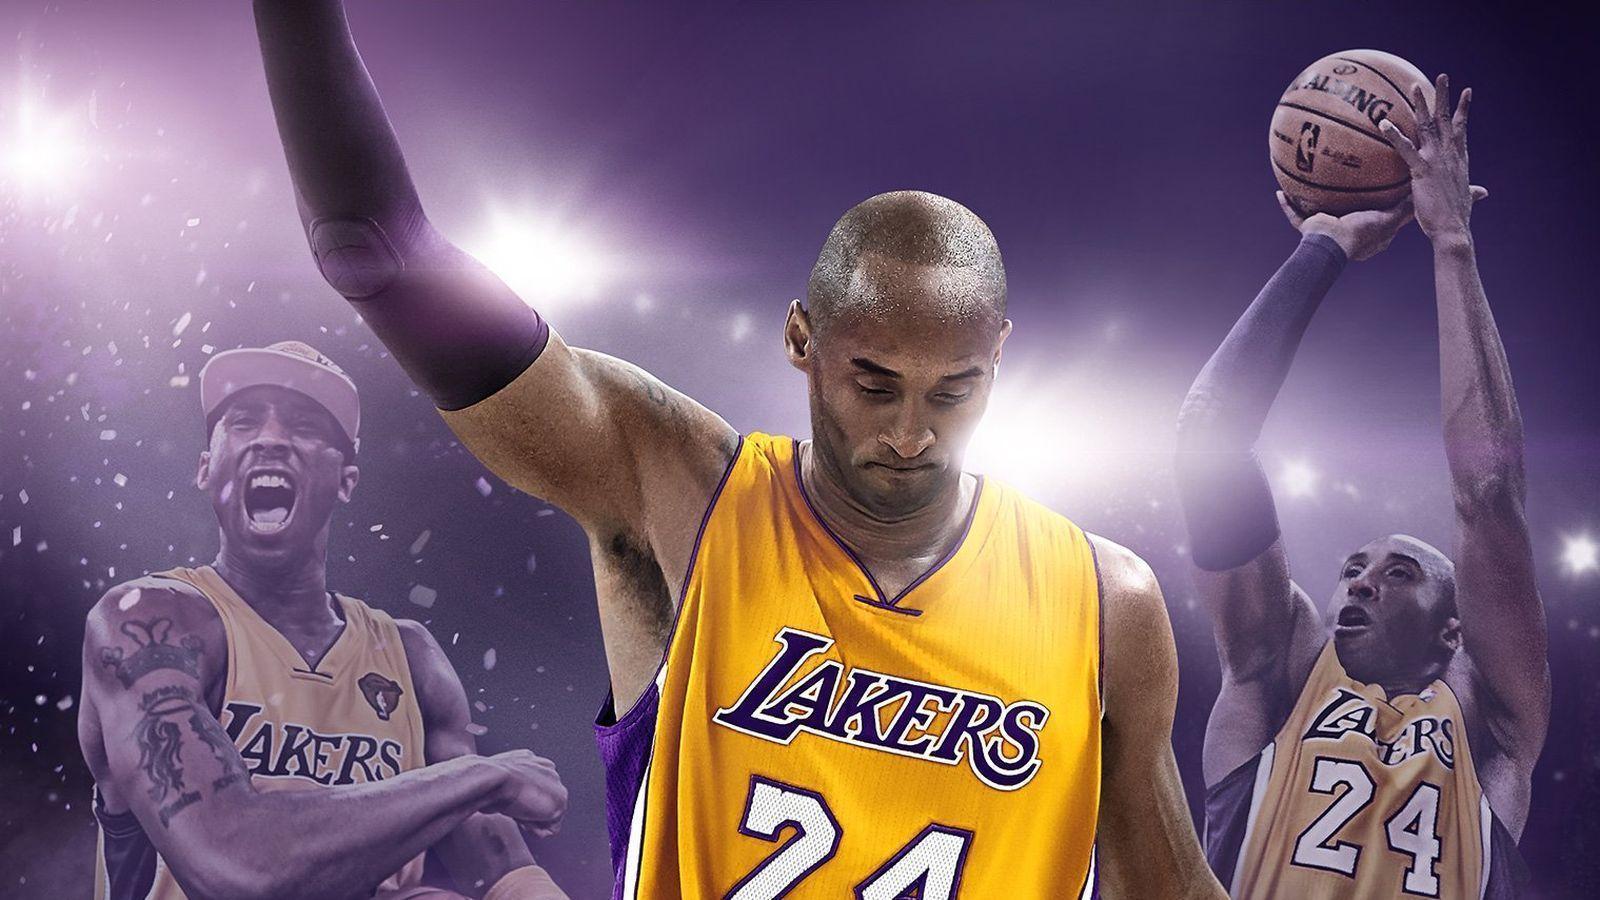 NBA 2K17 honors Kobe Bryant with &;Legend Edition&; this fall